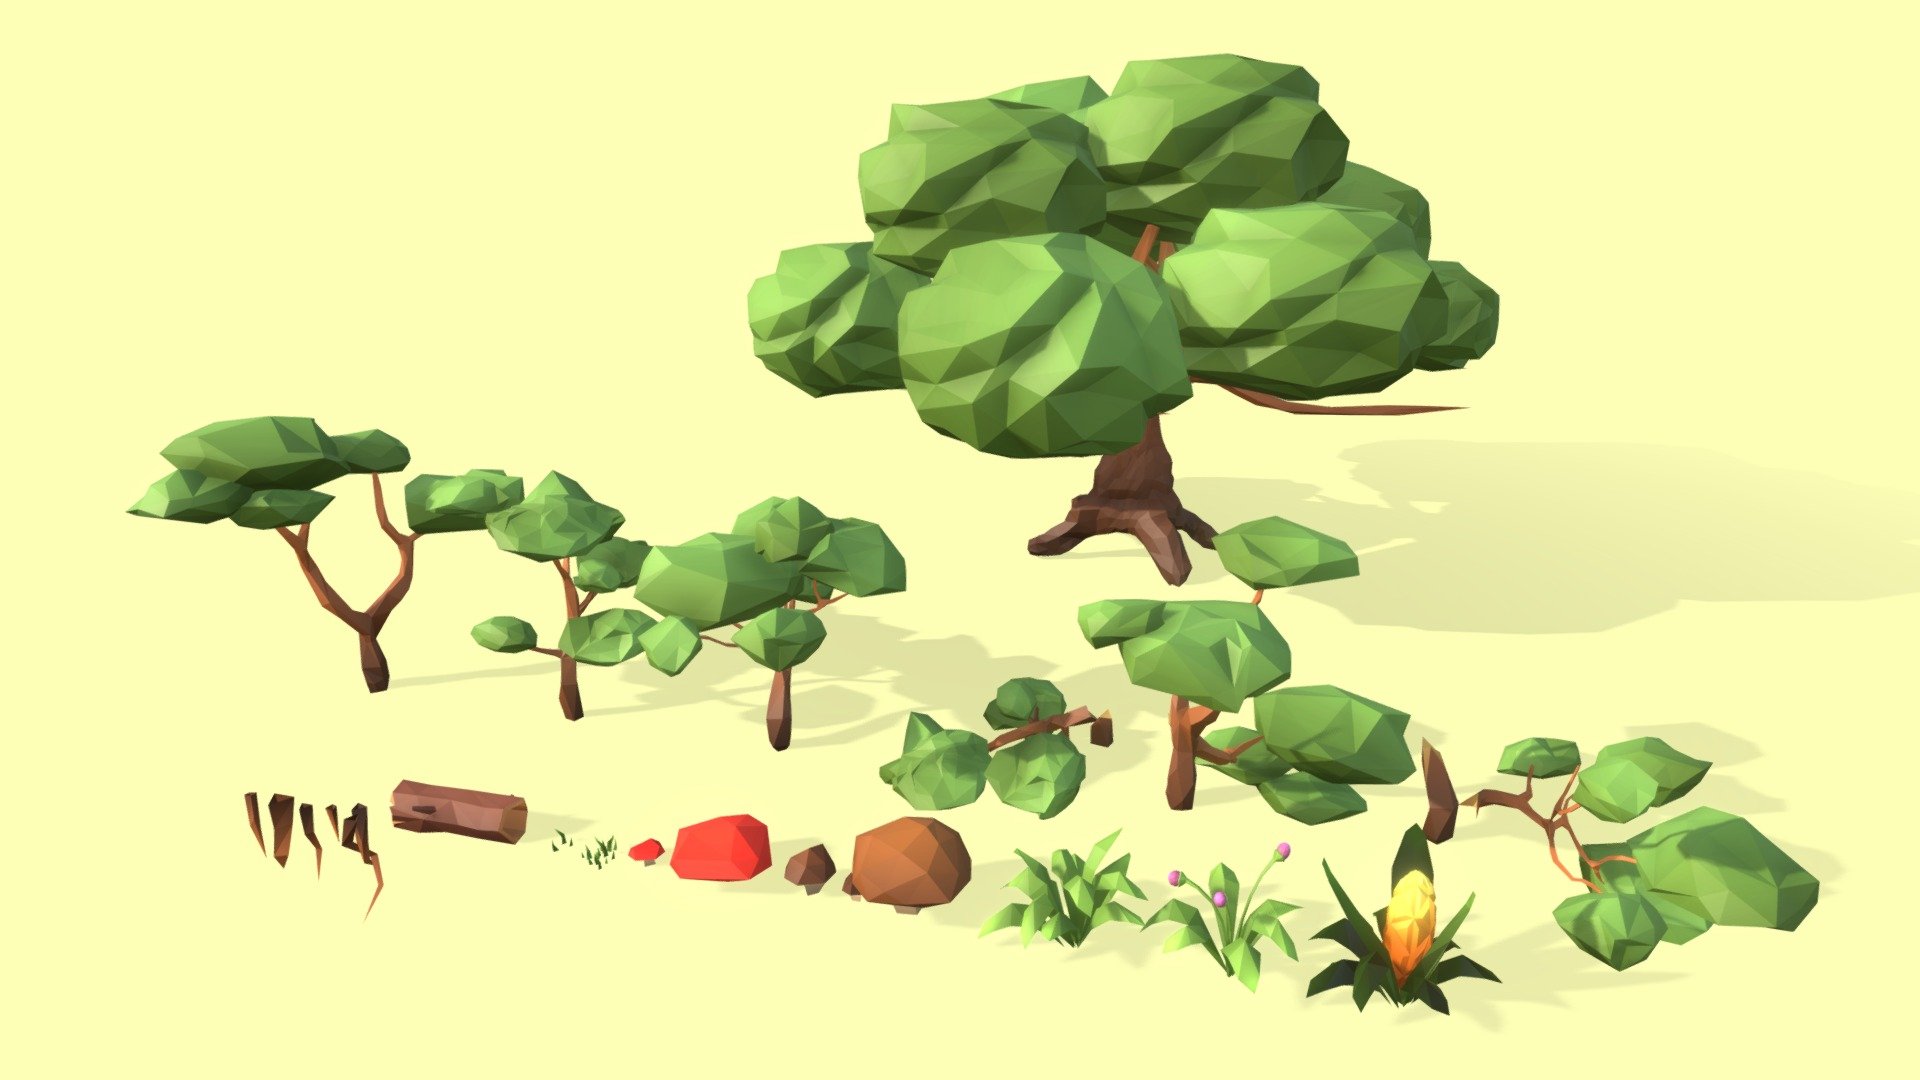 This low poly, game ready, nature pack consists of:
- 3 Small trees (614, 1058 and 926 triangles)
- 3 Fallen small trees (1062, 636, 840 triangles)
- 1 Huge tree (6776 triangles)
- 5 Different tree roots (82 triangles in total)
- 1 Hollow tree (194 Triangles)
- 3 red mushrooms (100 Triangles in total)
- 3 Brown mushrooms (170 Triangles in total)
- 3 Plants (246, 496 and 610 Triangles)
- 2 Small grass patches (31 and 150 Triangles)

The tree leaves textures are in two colors: green and orange. All trees share the same texture including the tree roots.
The other foliage objects share a secondary texture named SmallFoliage_Diffuse 3d model